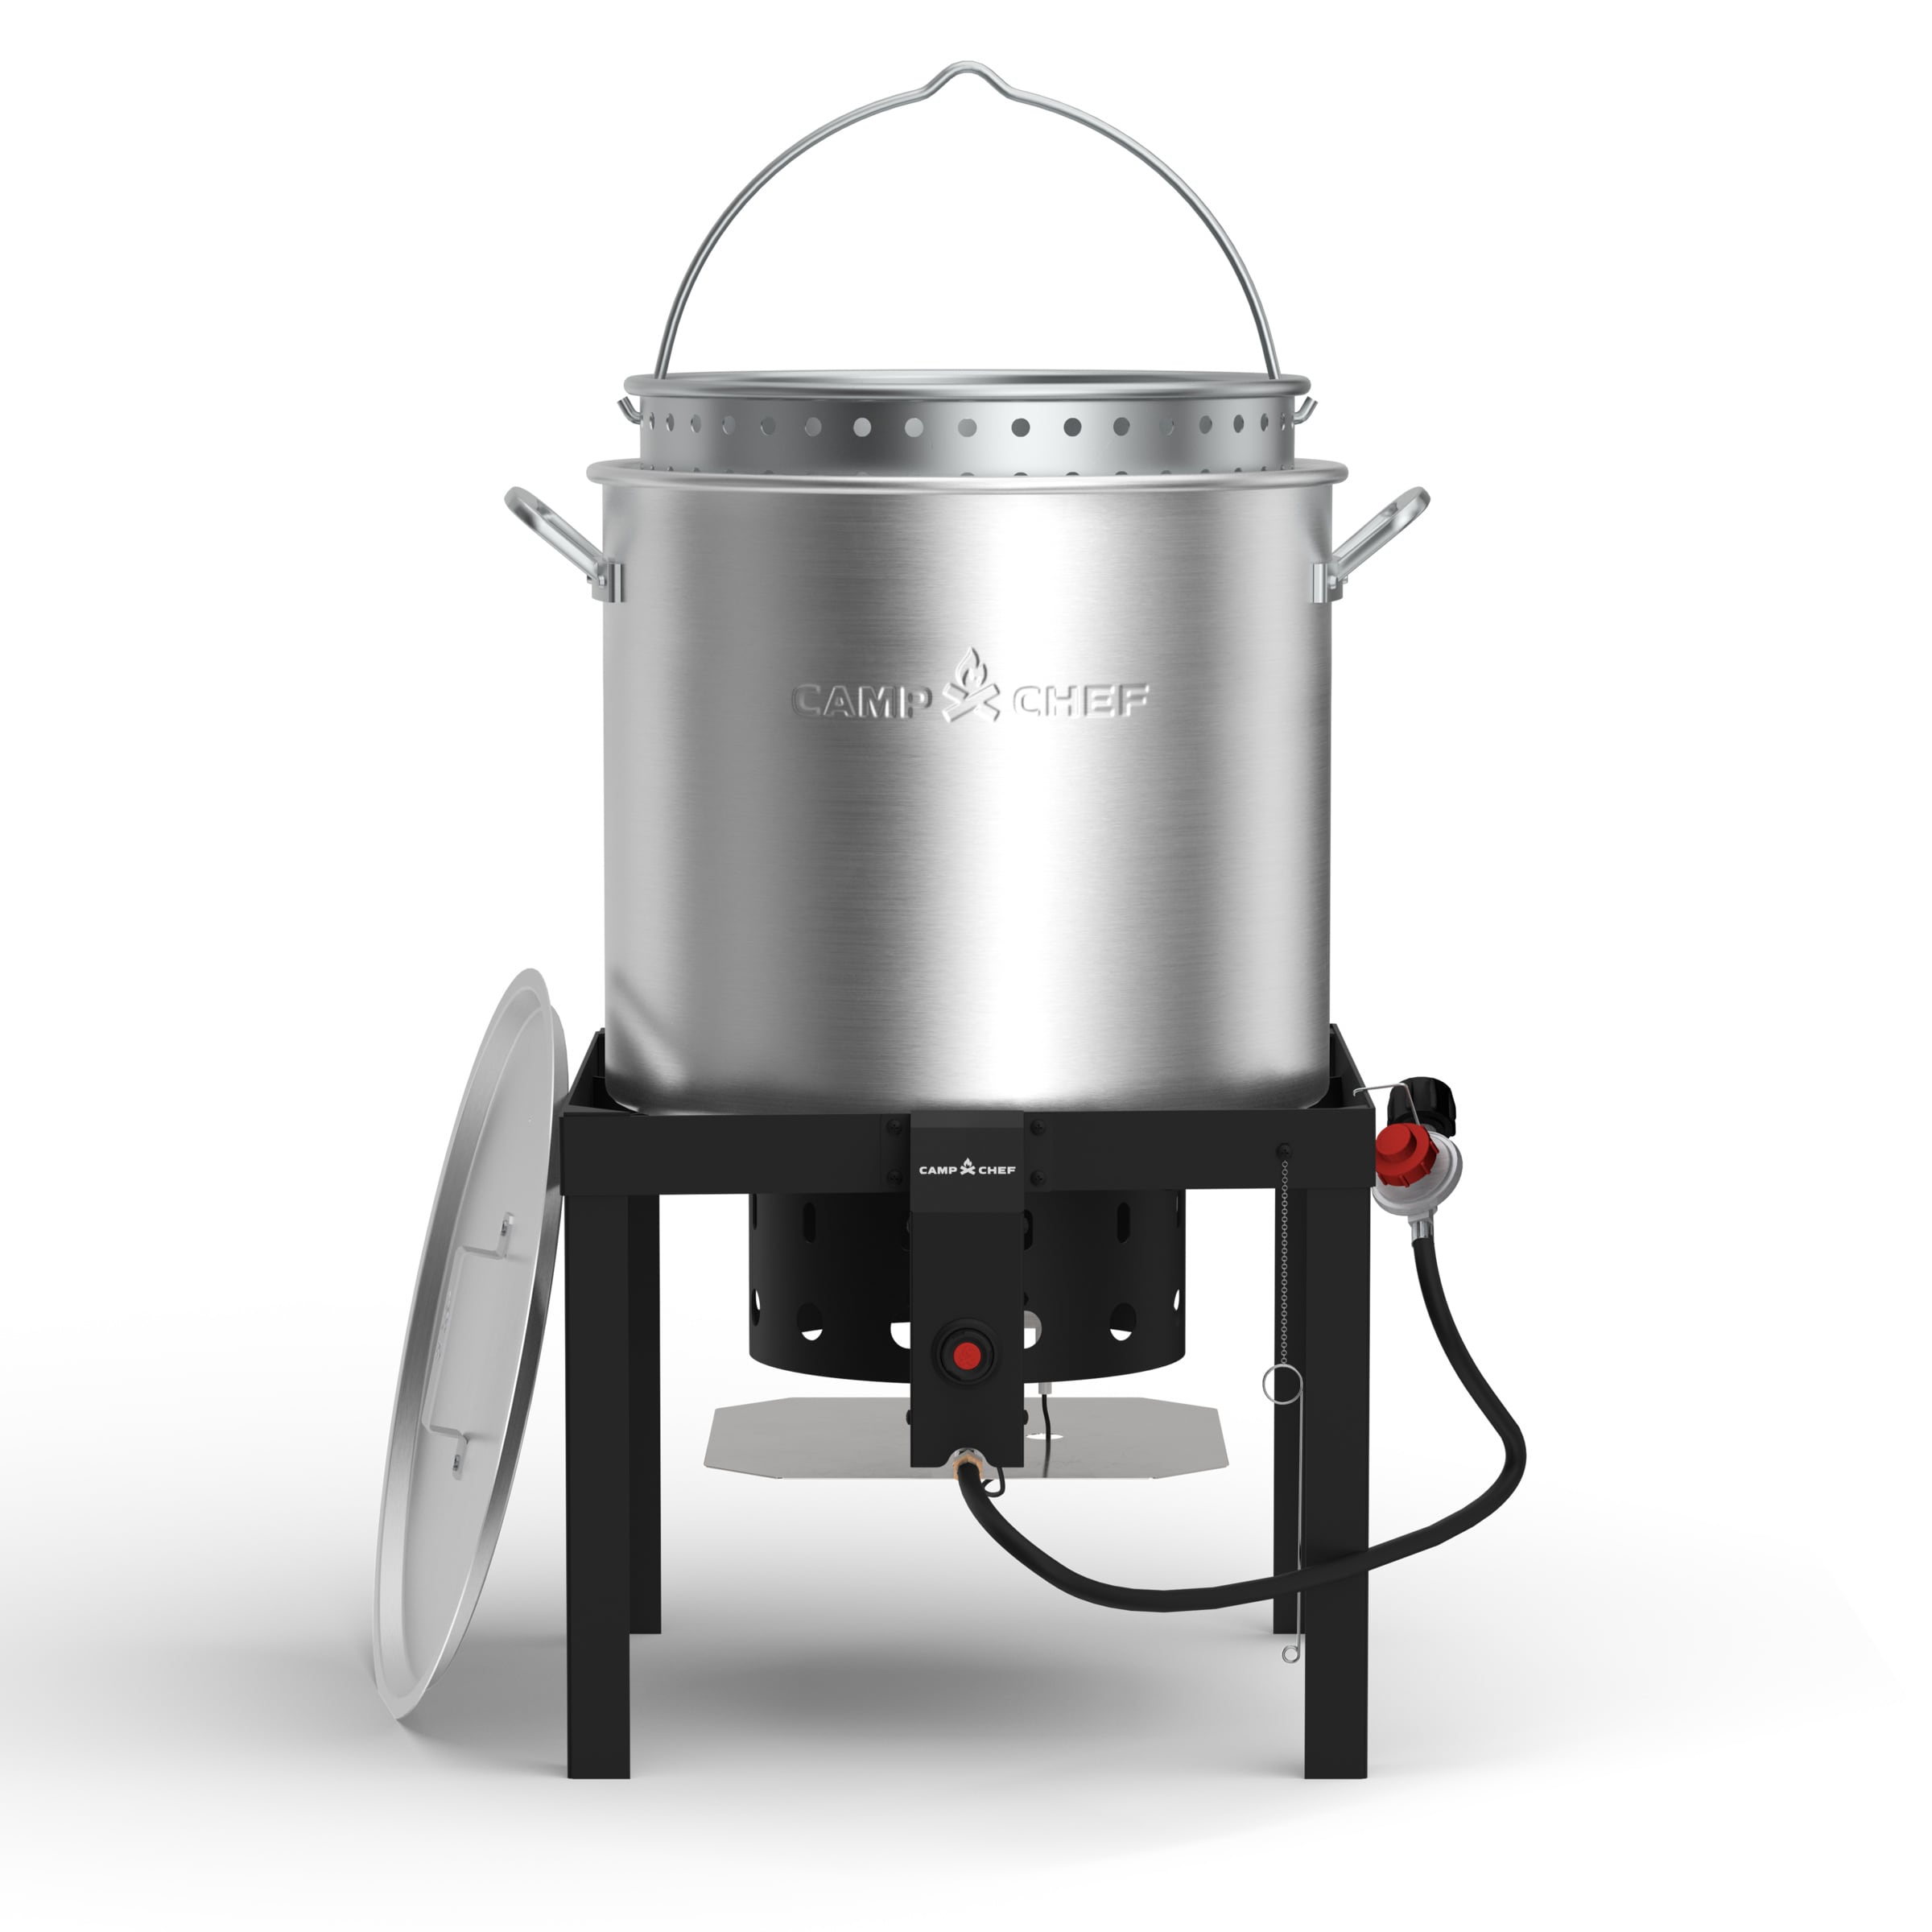 29 Qt Aluminum Turkey Frying, Boiling and Steaming Cooker Package - Metal  Fusion, Inc.